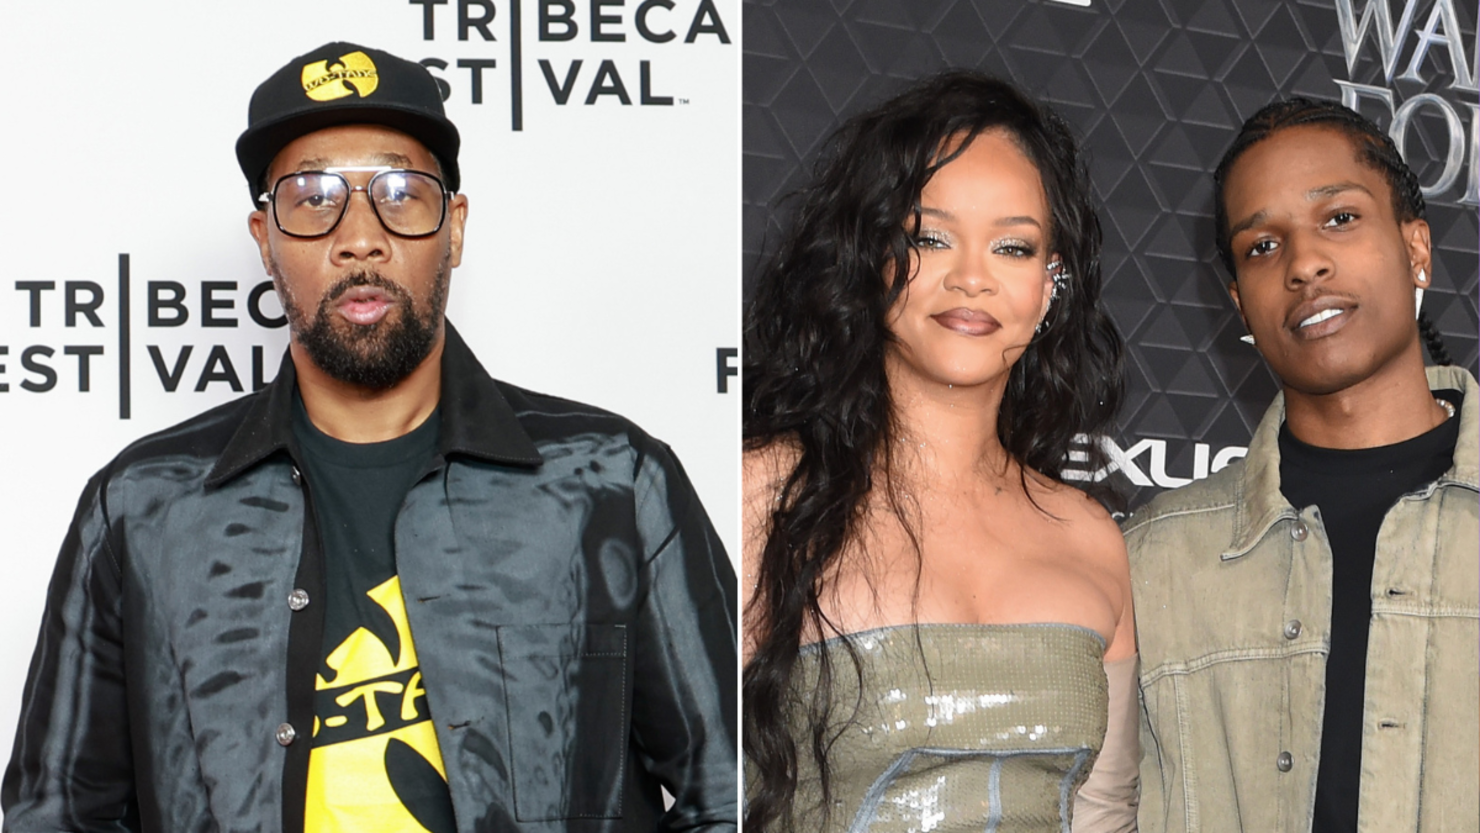 RZA on New Wu-Tang Clan Music & Being Honored By Rihanna, ASAP Rocky